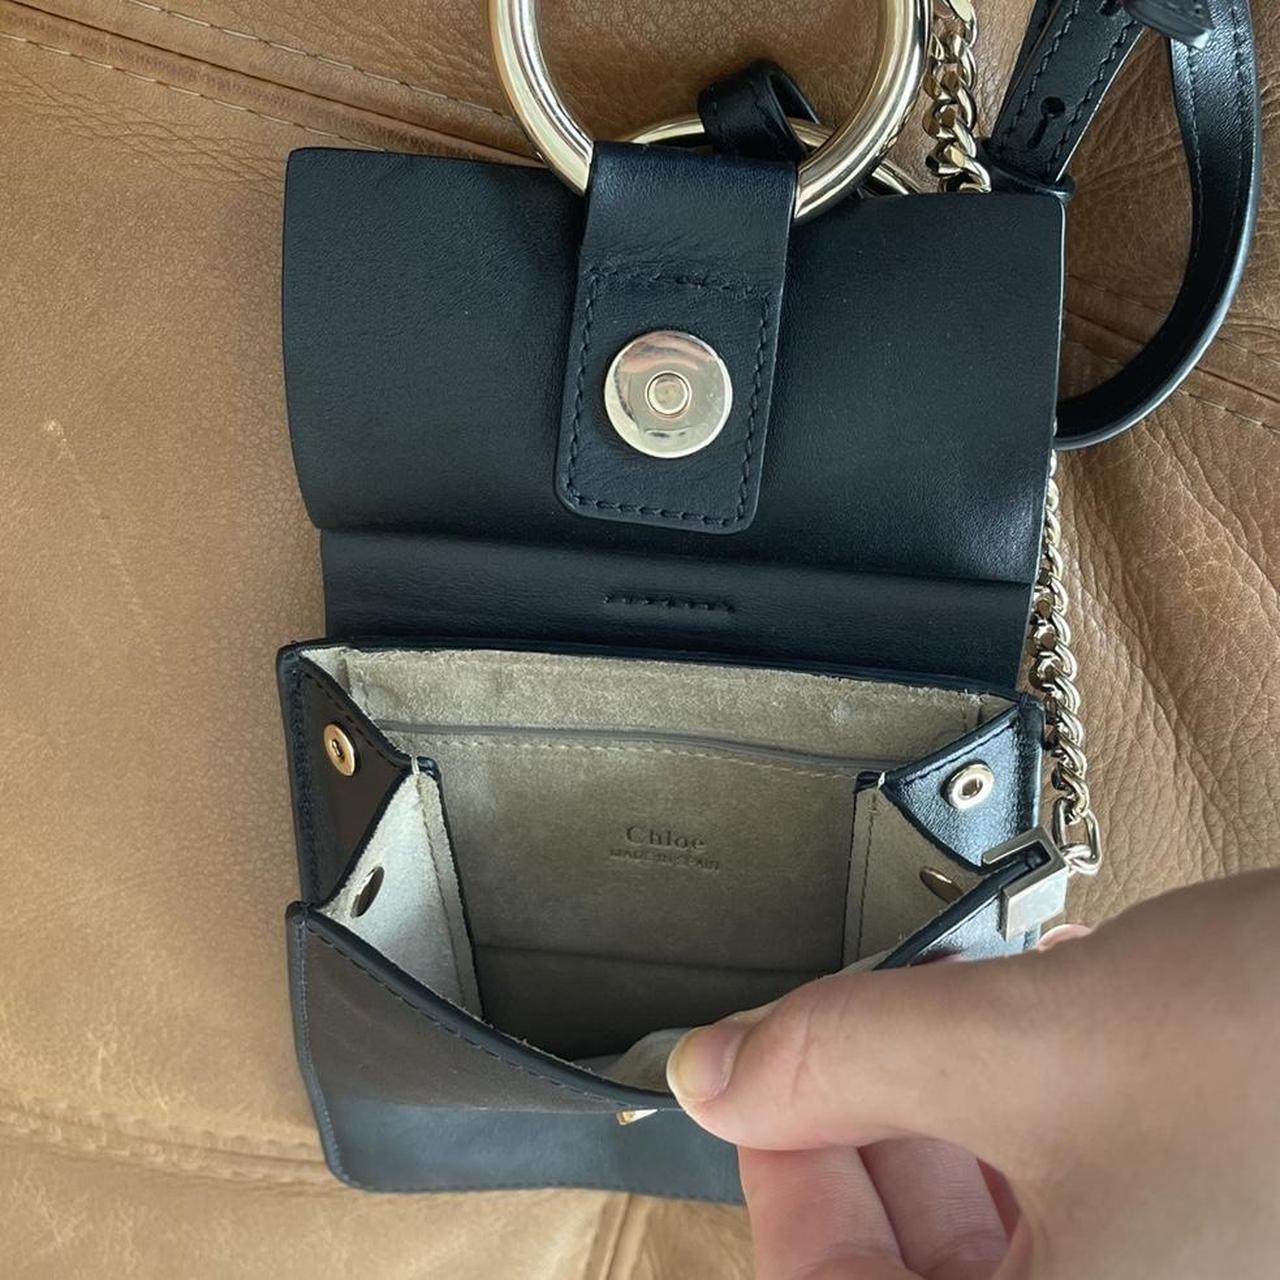 Chloe Faye Bag Small 🦋 Authentic Purchased from - Depop